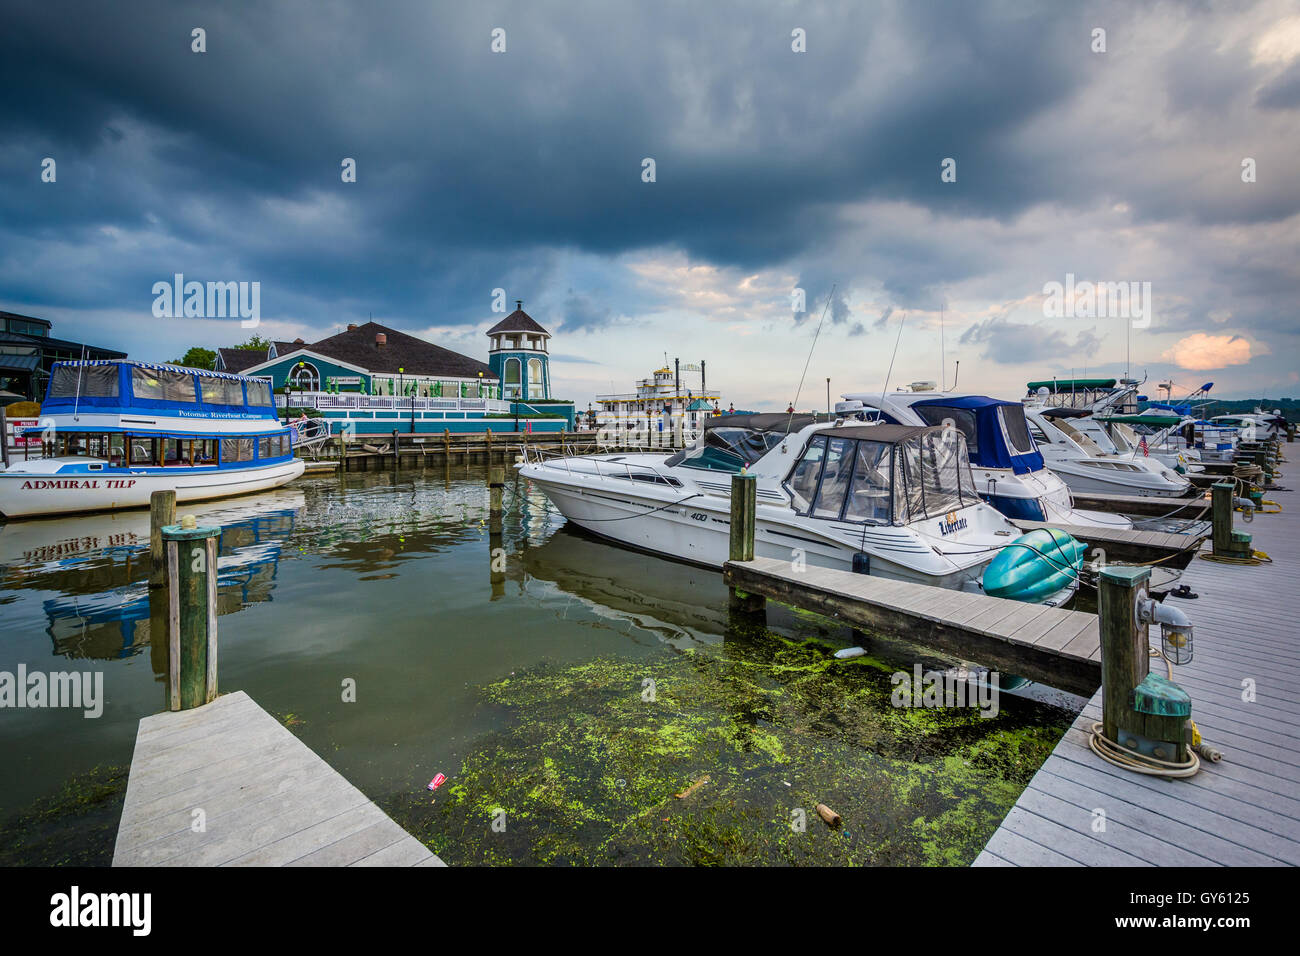 Boote angedockt am Potomac River-Ufer, in Alexandria, Virginia. Stockfoto